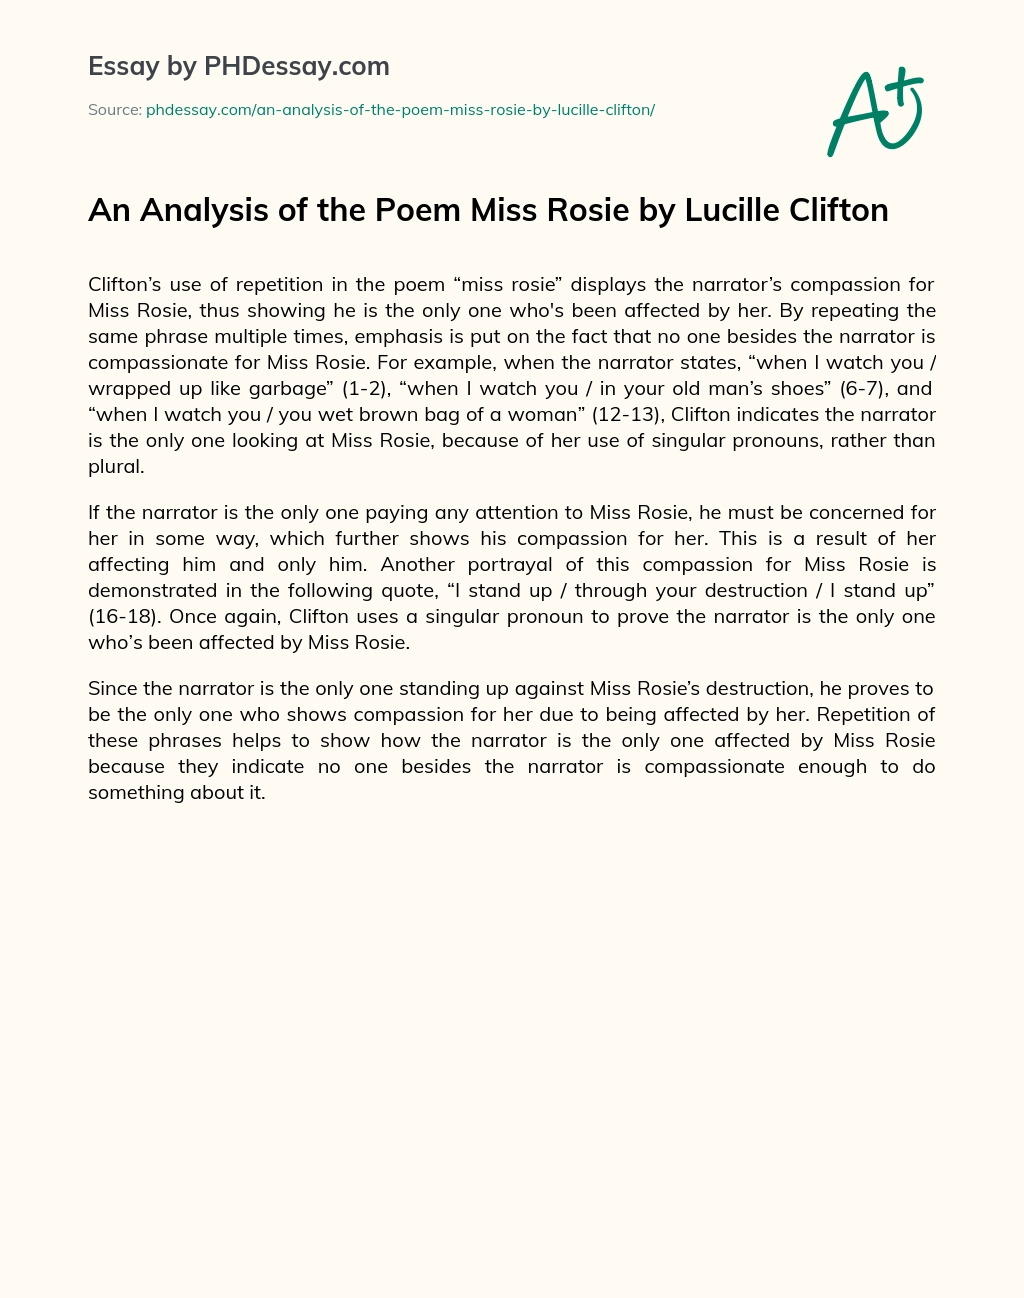 An Analysis of the Poem Miss Rosie by Lucille Clifton essay